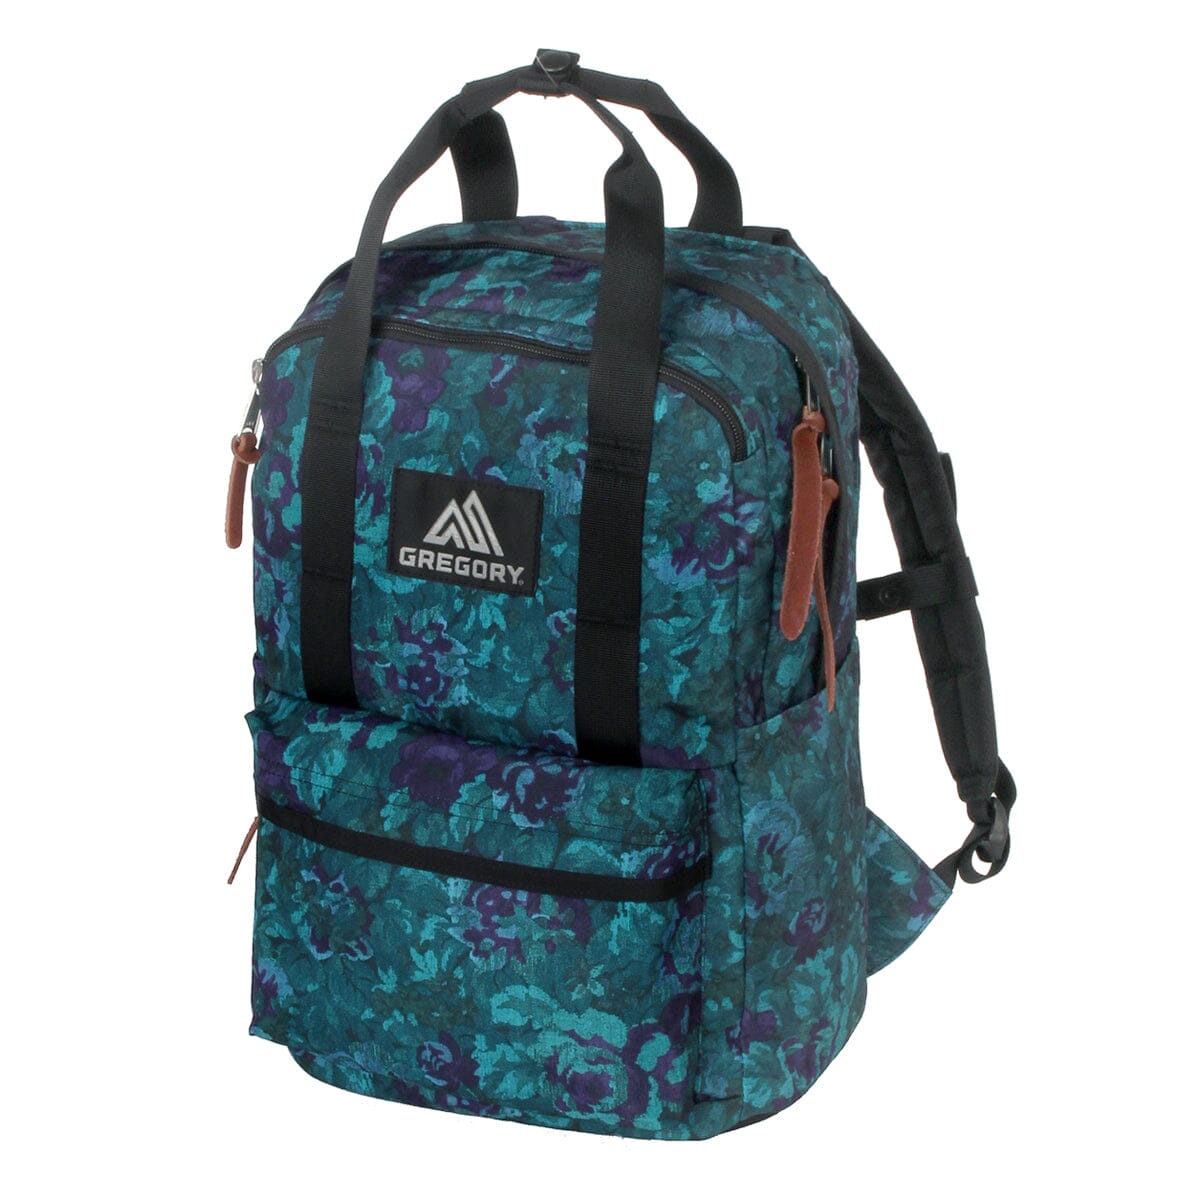 Gregory Easy Peasy Day Backpack Blue Tapestry 